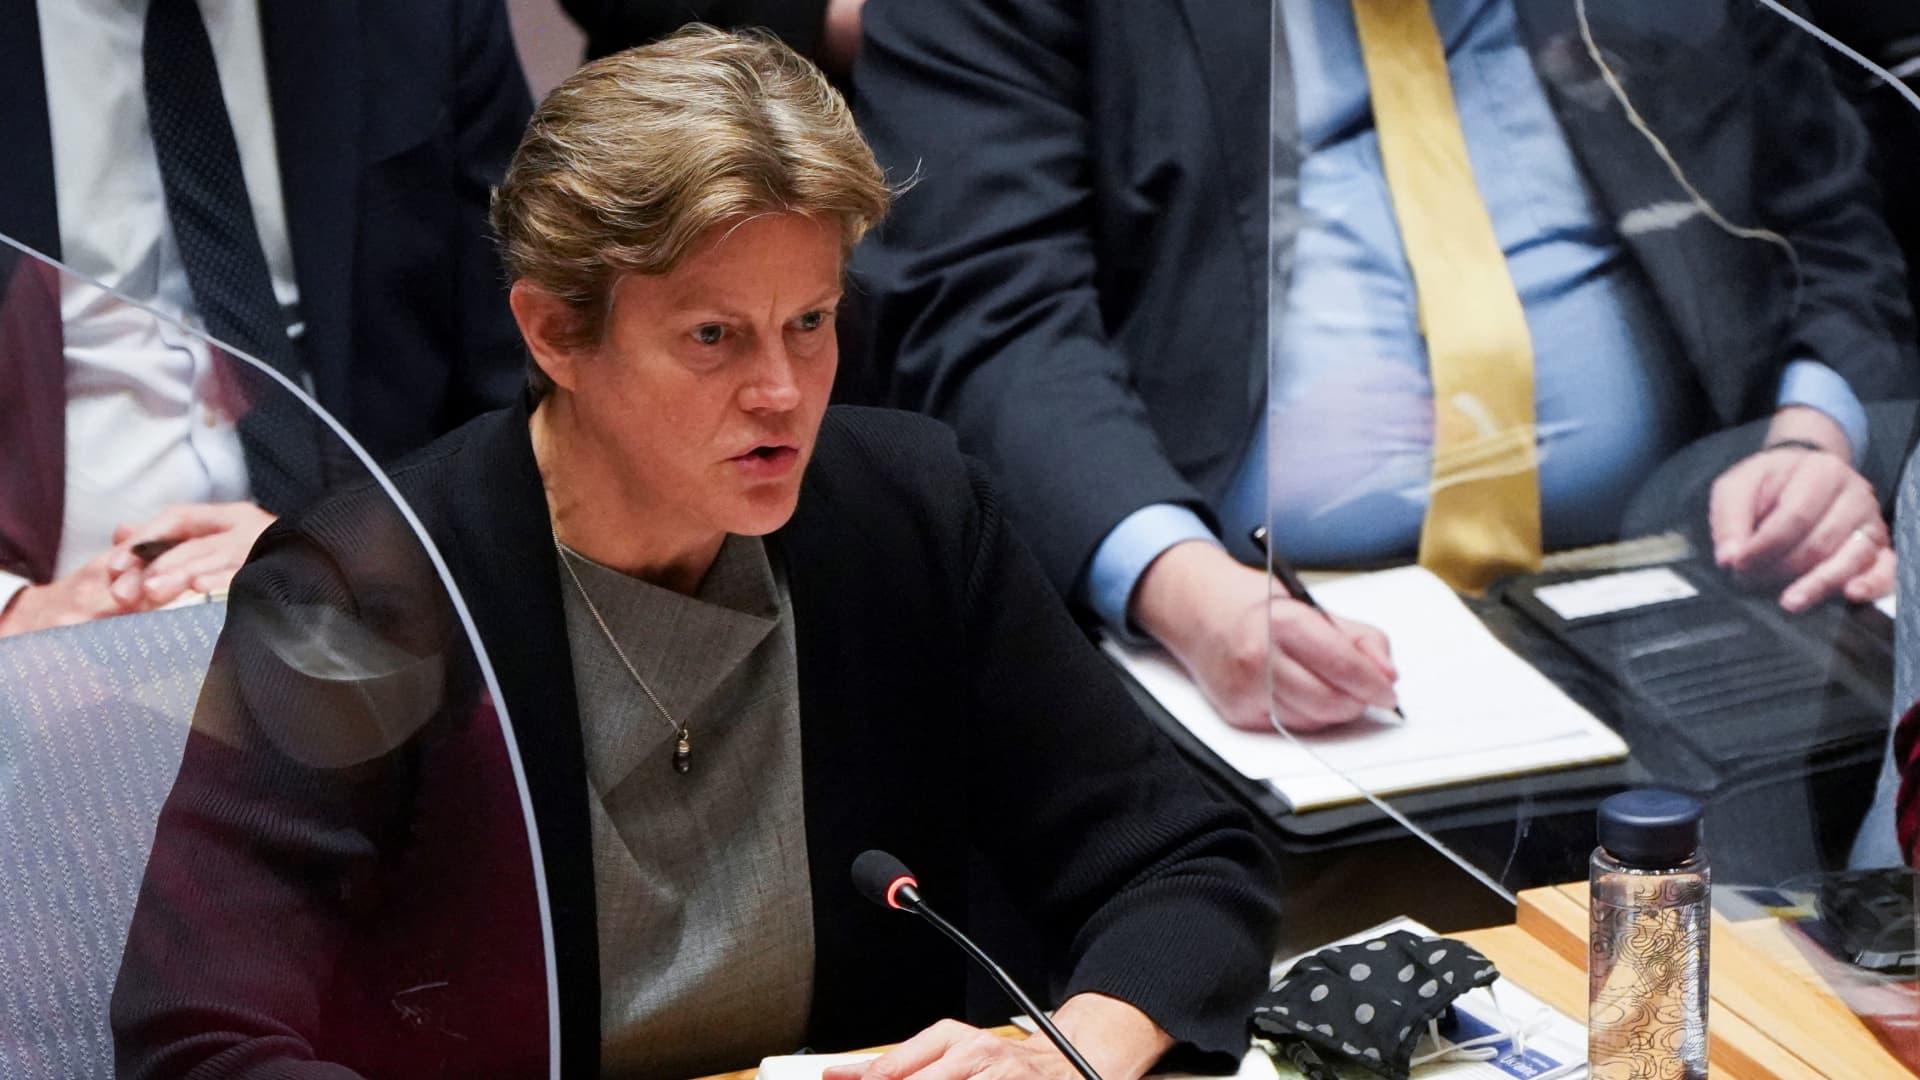 British Ambassador to the U.N. Barbara Woodward speaks during the United Nations Security Council meeting on Threats to International Peace and Security, following Russia's invasion of Ukraine, in New York City, U.S. March 11, 2022.